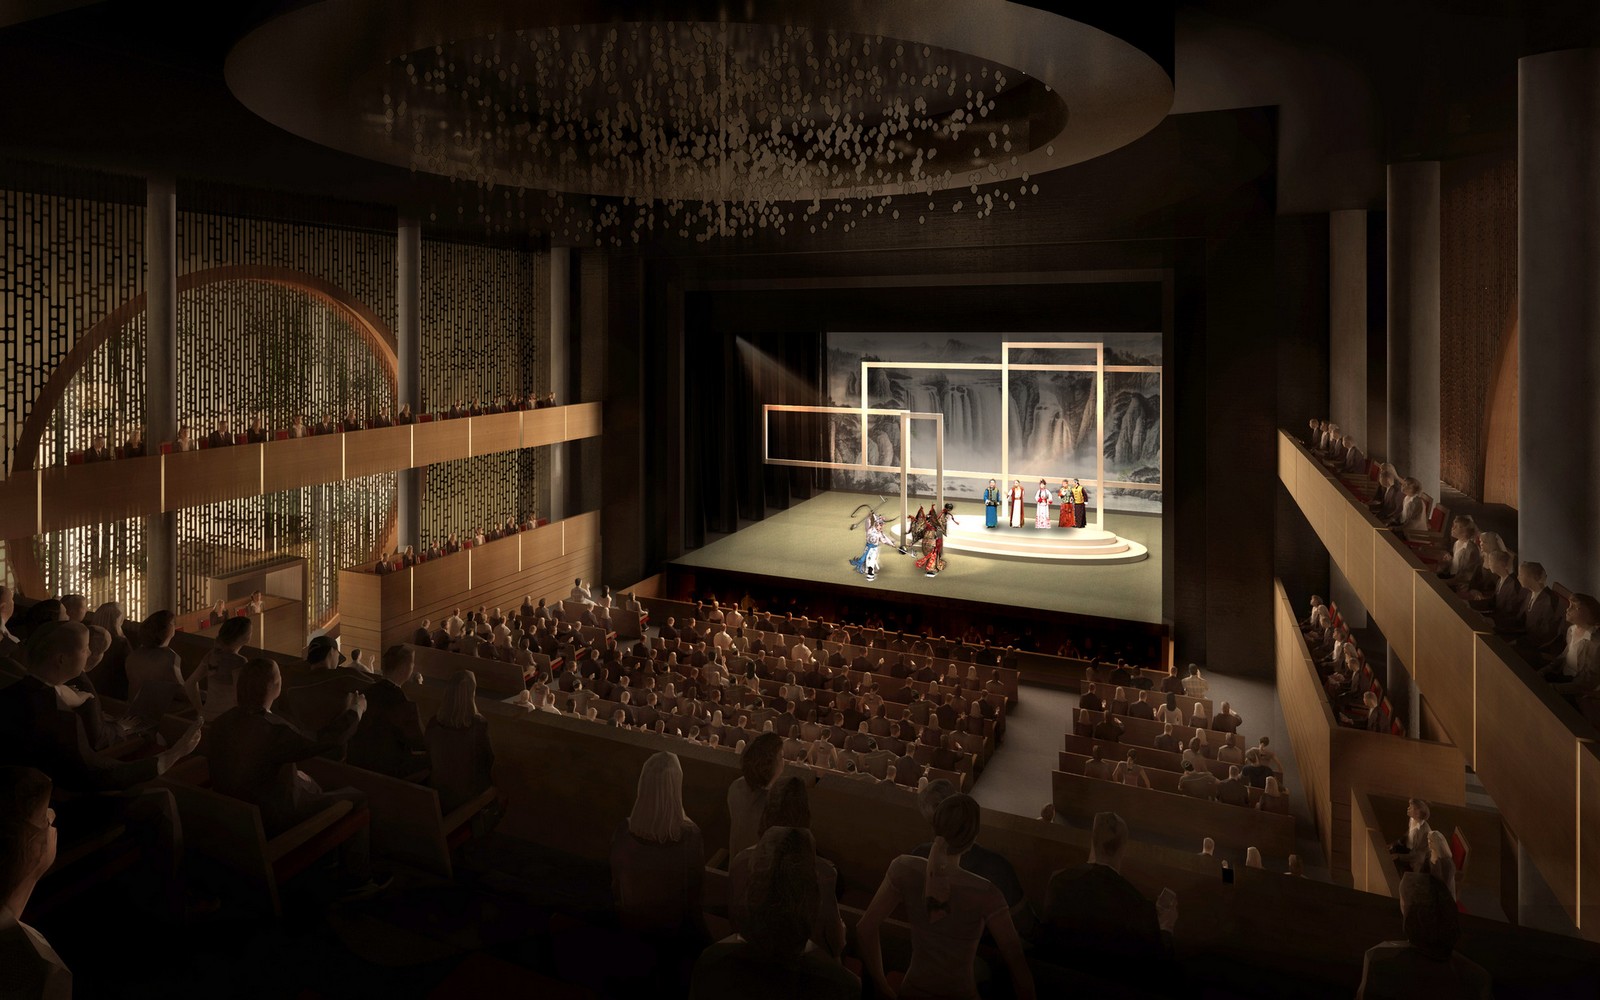 The Xiqu Centre will be a world-class performance venue